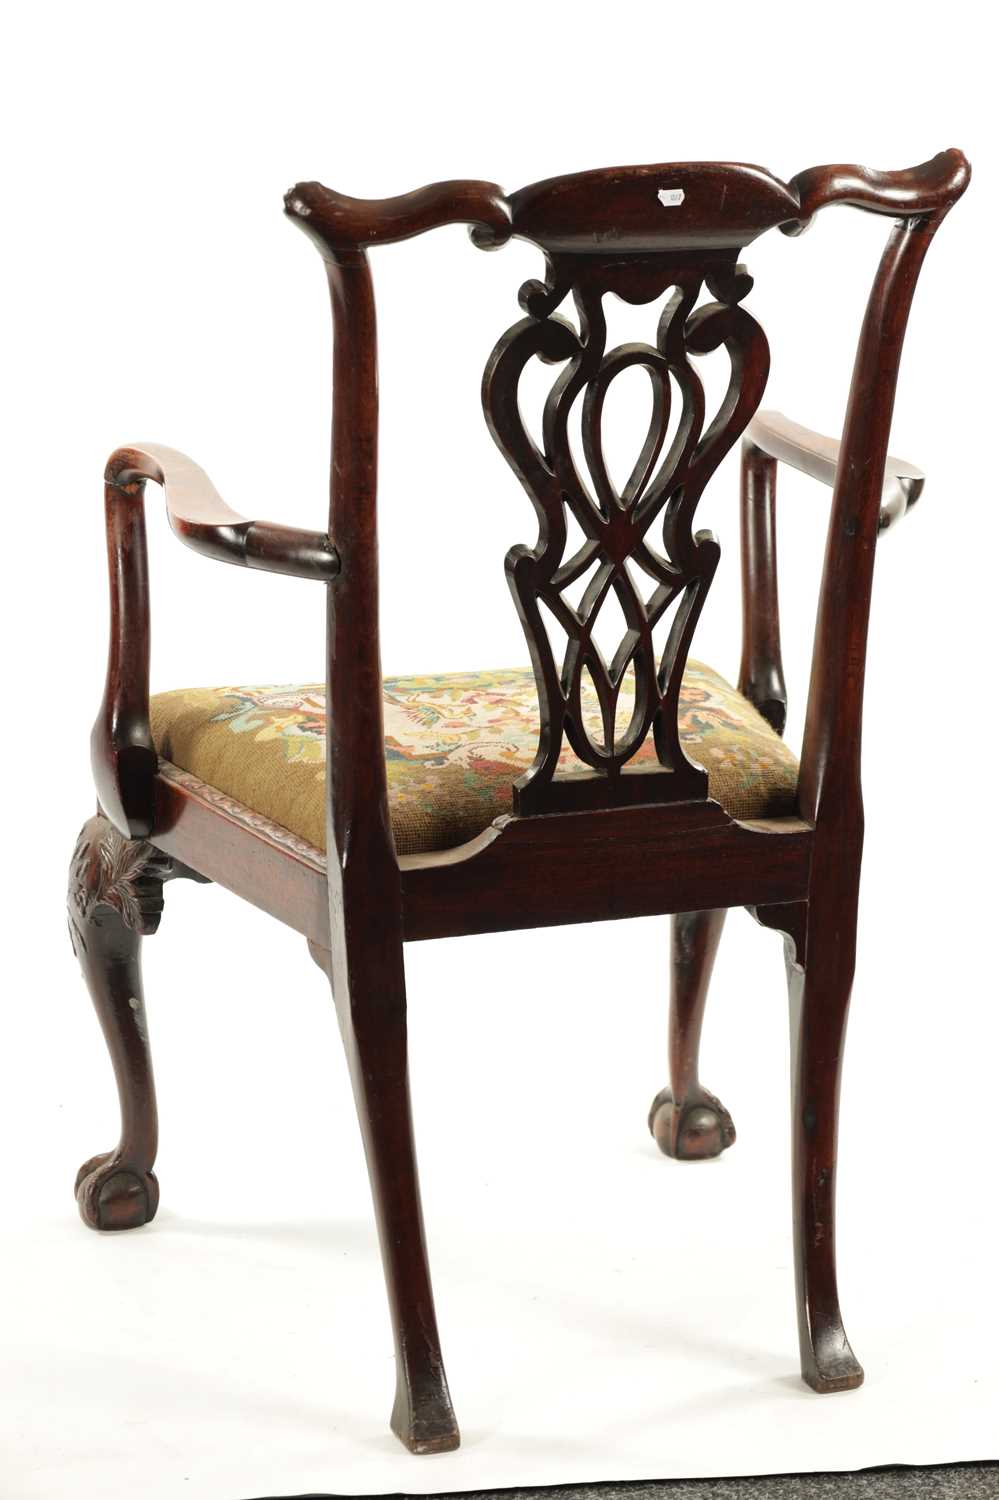 A FINE 18TH CENTURY CHIPPENDALE STYLE MAHOGANY ARMCHAIR - Image 6 of 6